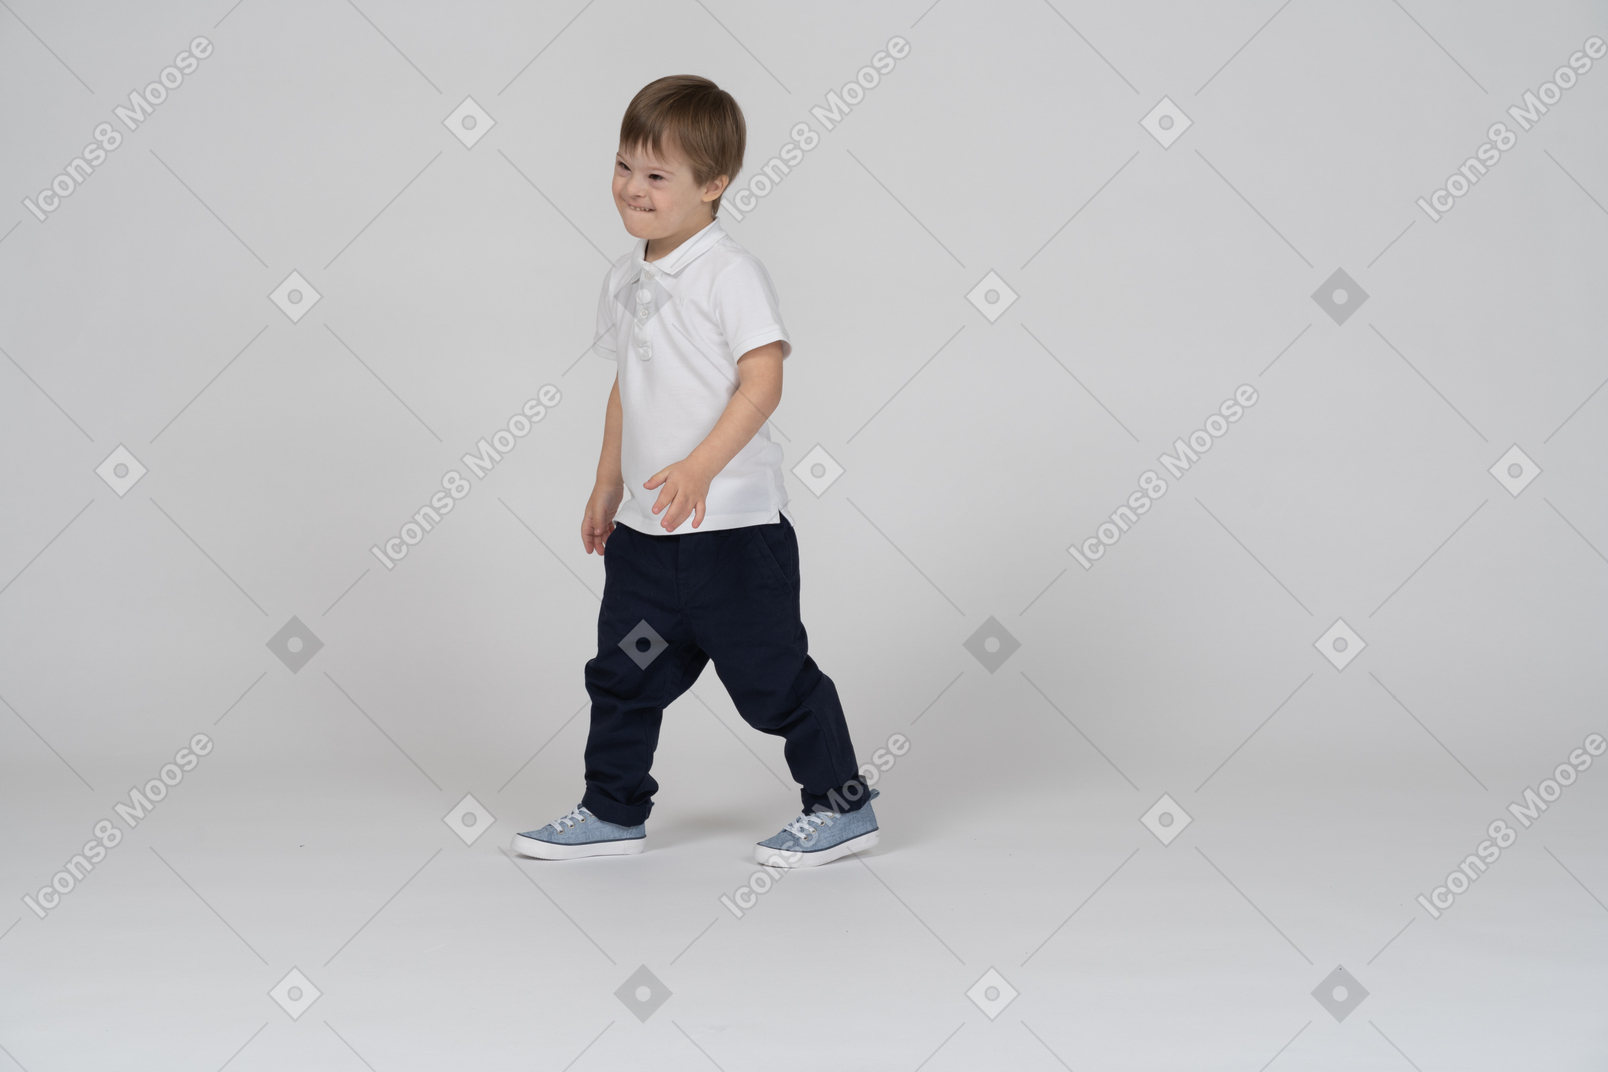 Three-quarter view of a boy walking and biting his lip mischievously